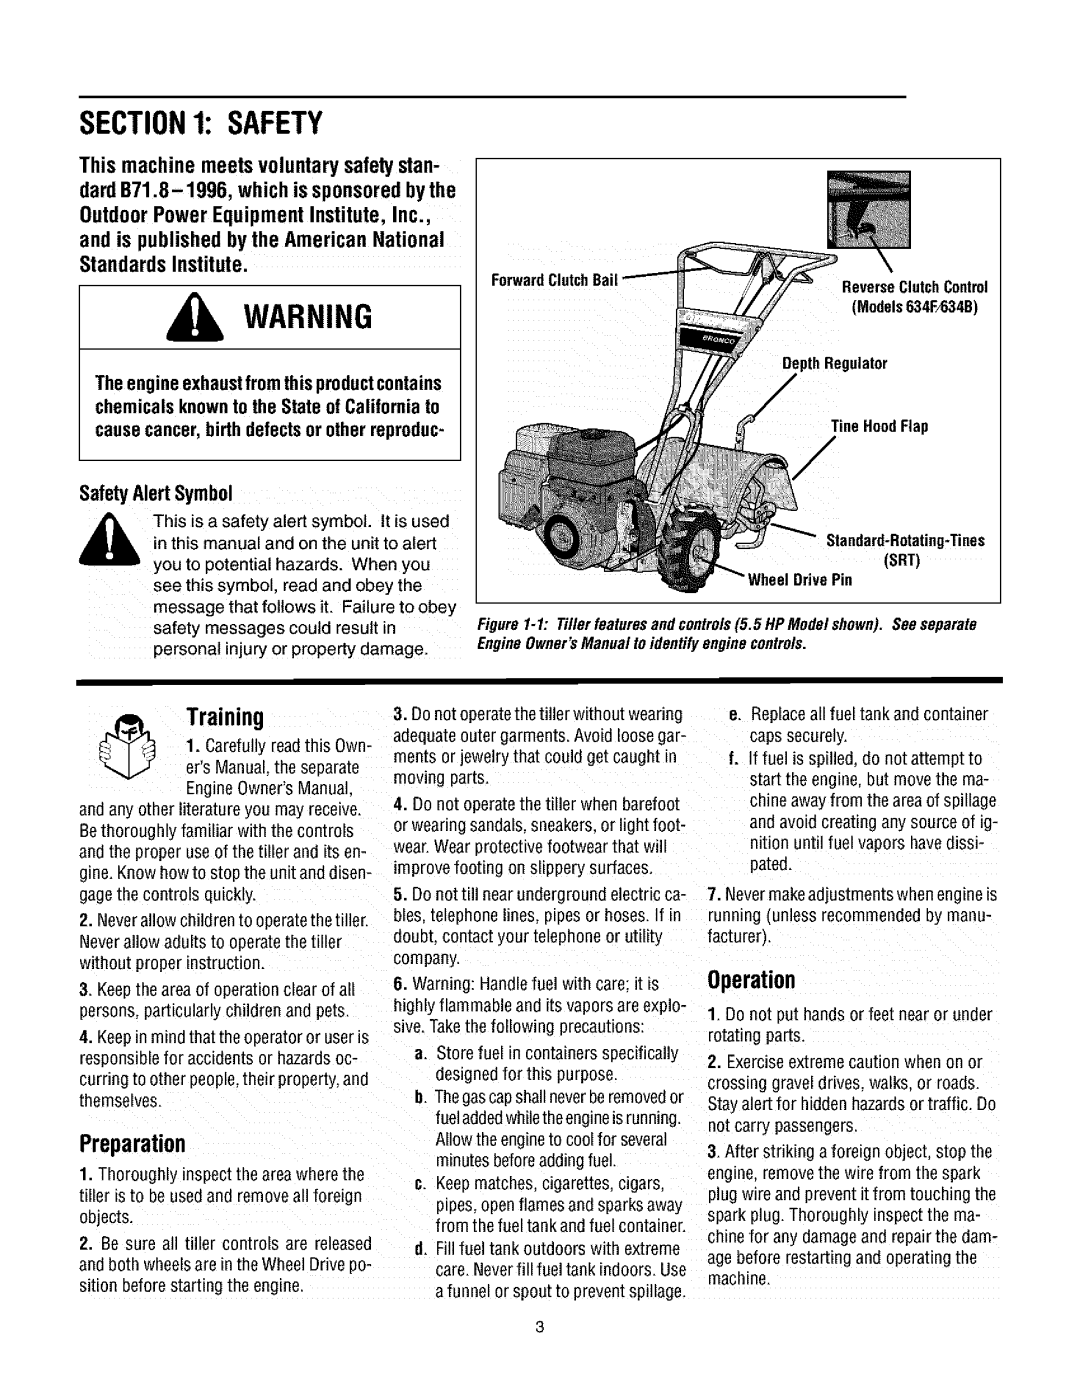 Troy-Bilt 630CN Training, Preparation, Operation, SafetyAlert Symbol, cause cancer, birth defects or other reproduc 